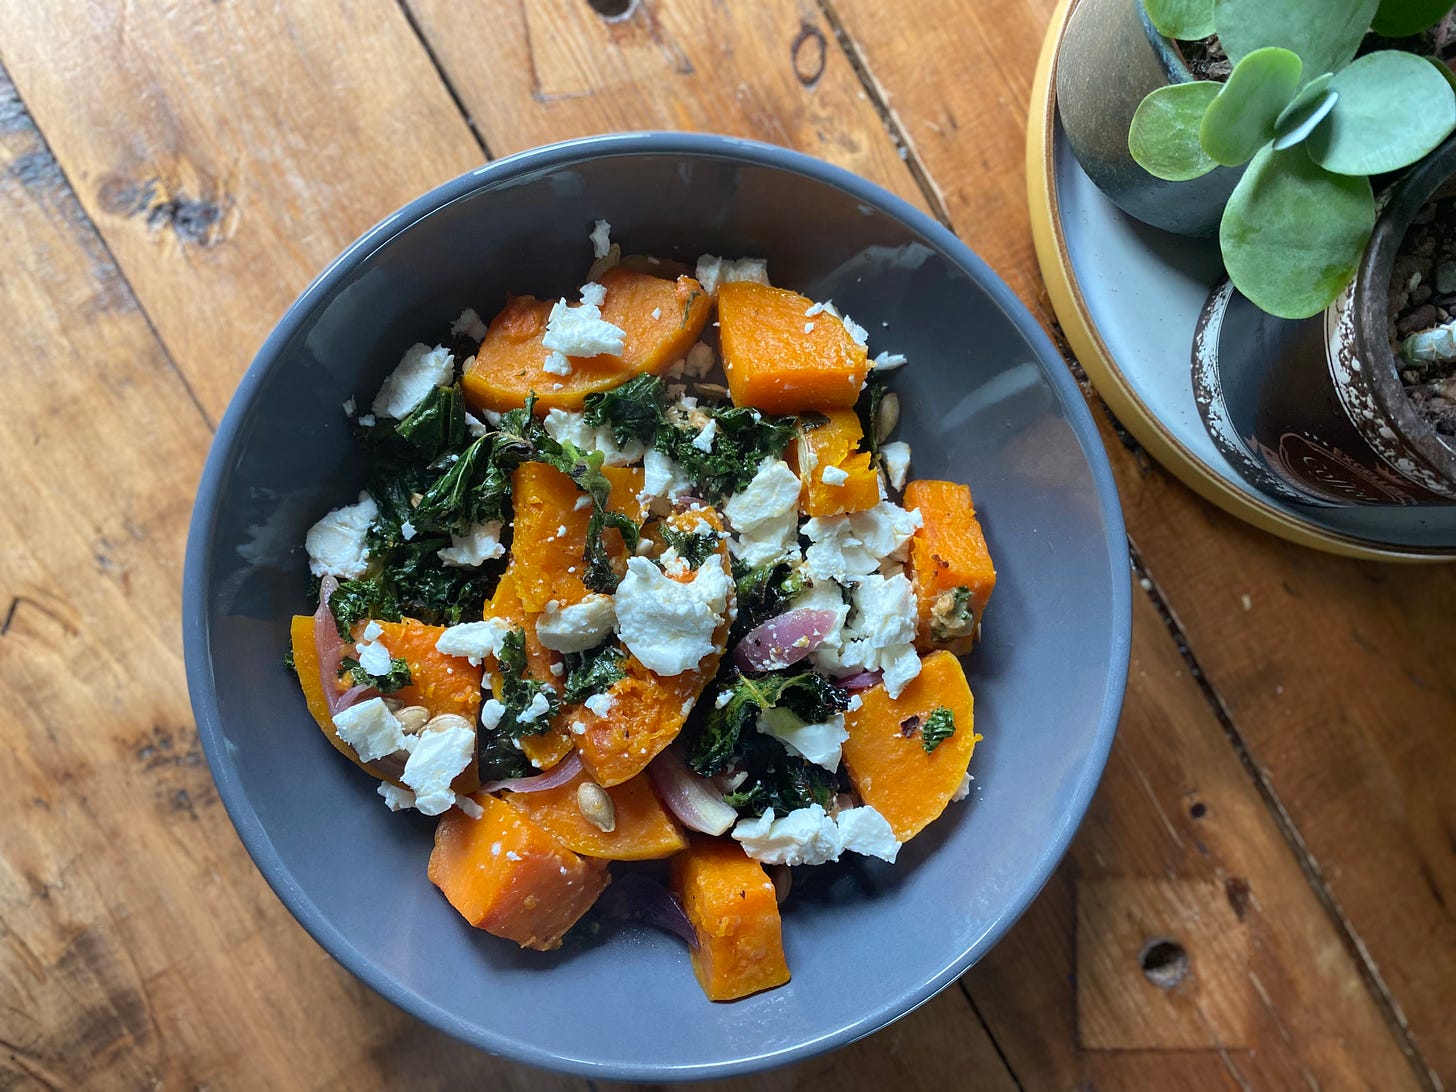 Grey bowl filled with squash, red onion, white crumbled cheese and kale. The bowl is placed next to a succulent plant on the table